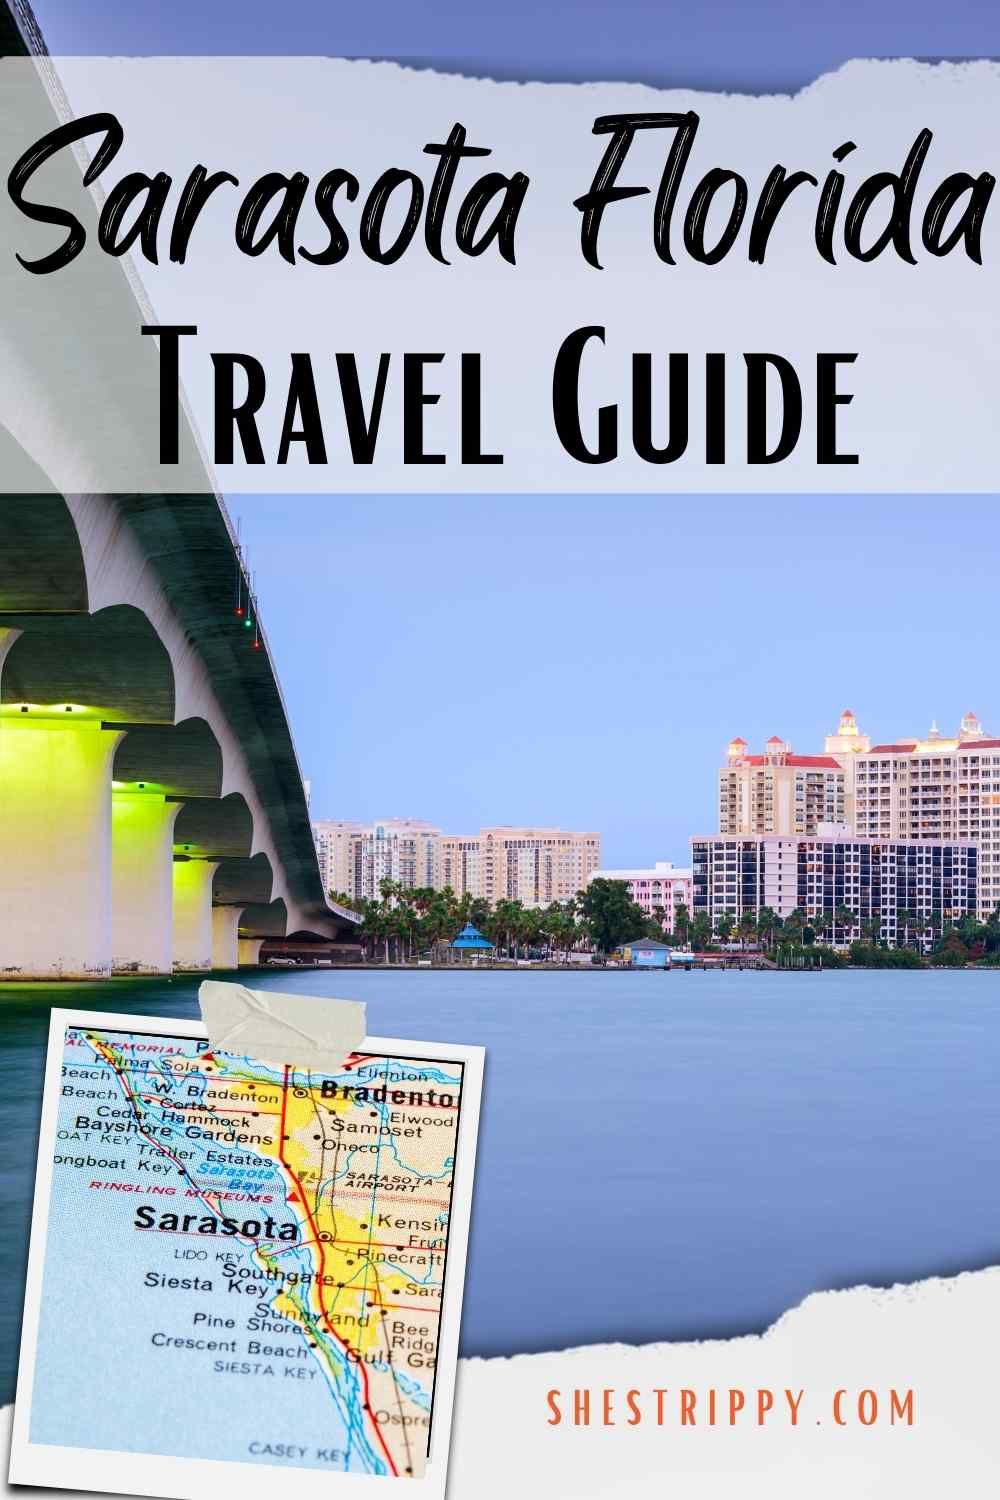 If you are looking for a diverse getaway destination this Sarasota Florida travel guide is perfect for you. #sarasotaflorida #florida #floridatravelguide